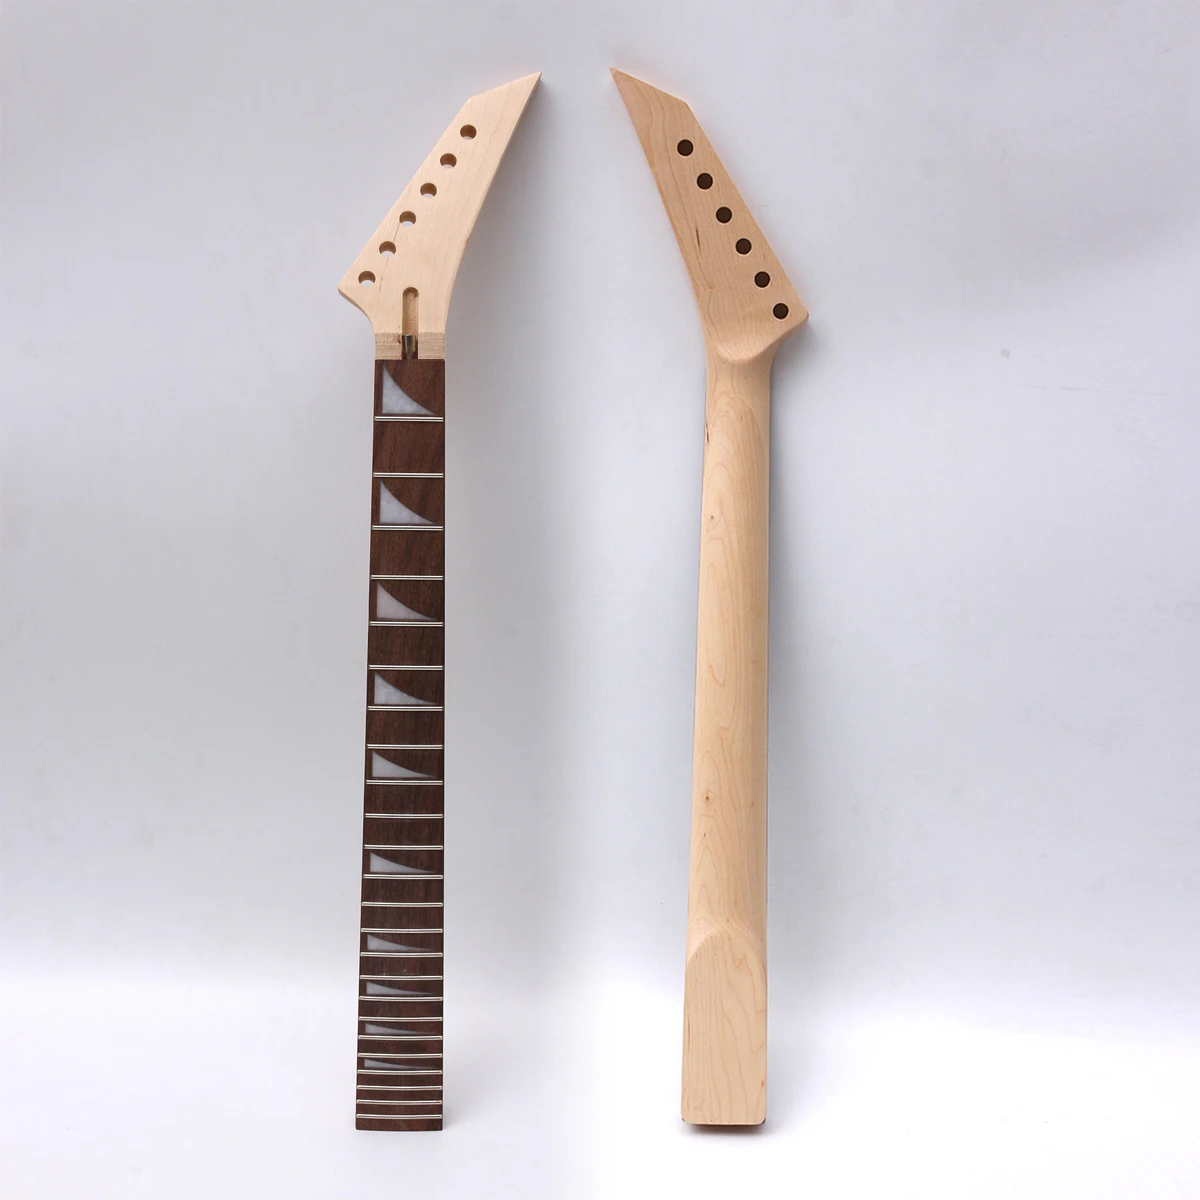 Fit Diy Electric Guitar Neck 24fret 25.5''inch 648mm Lock Nut Maple+Rosewood fingerboard Unfinished